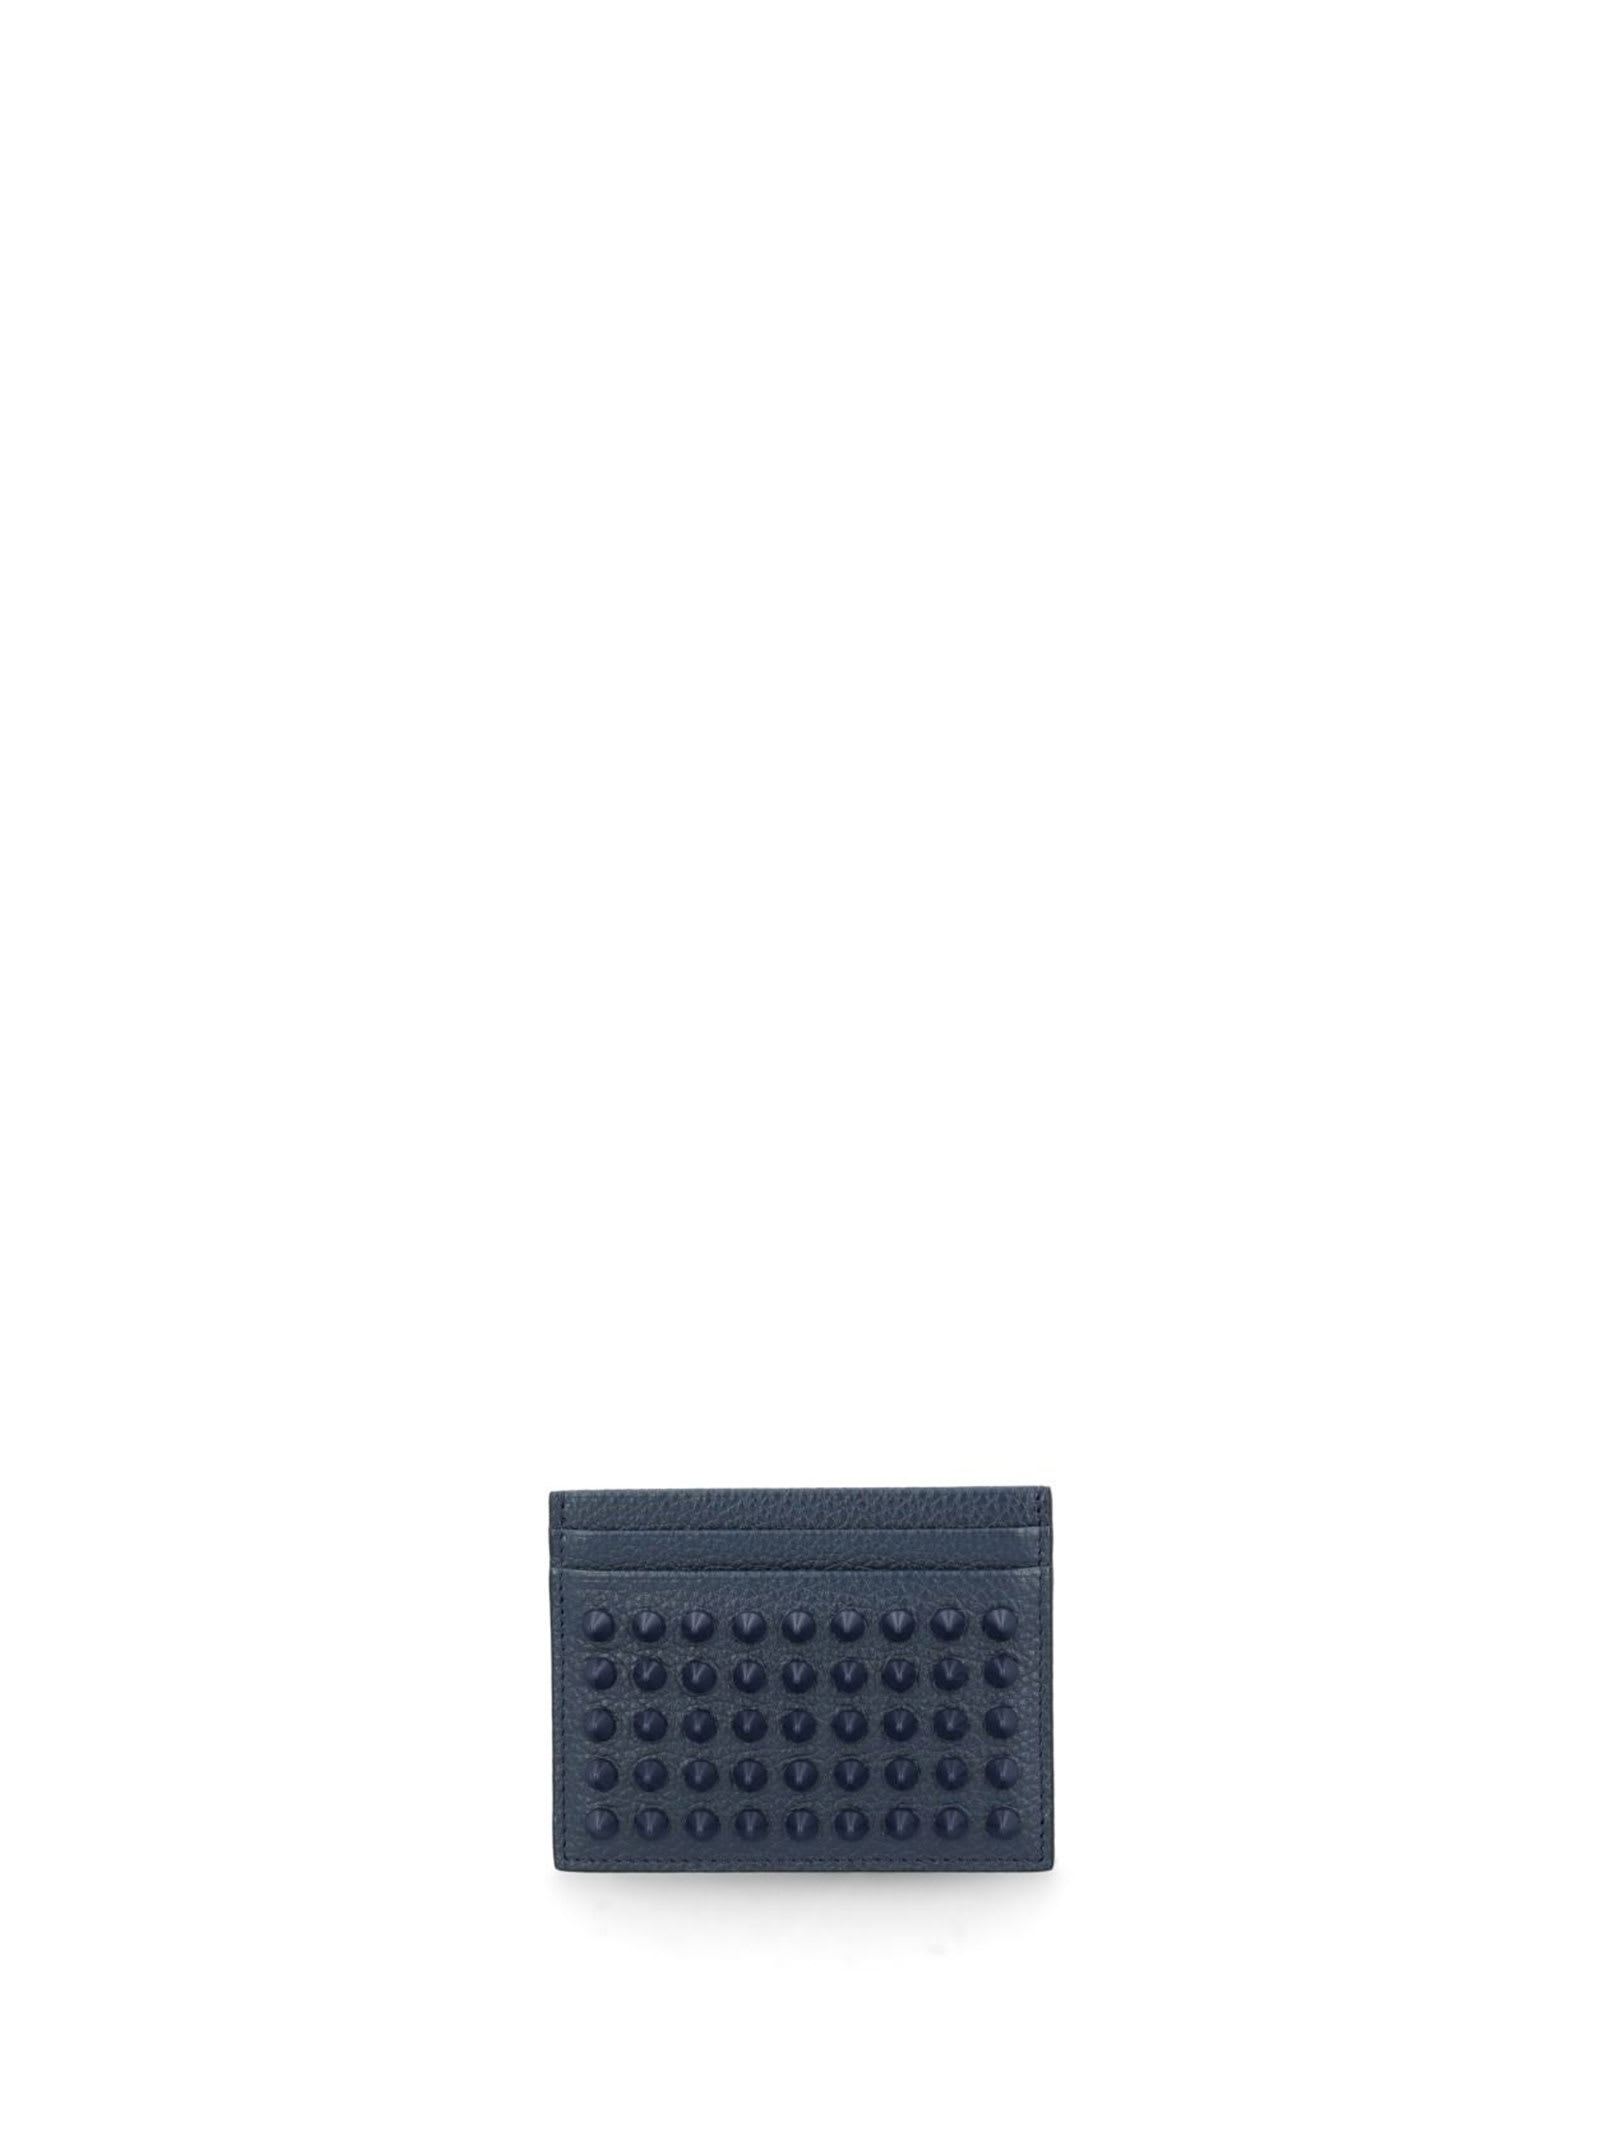 Christian Louboutin Card Holder With Studs